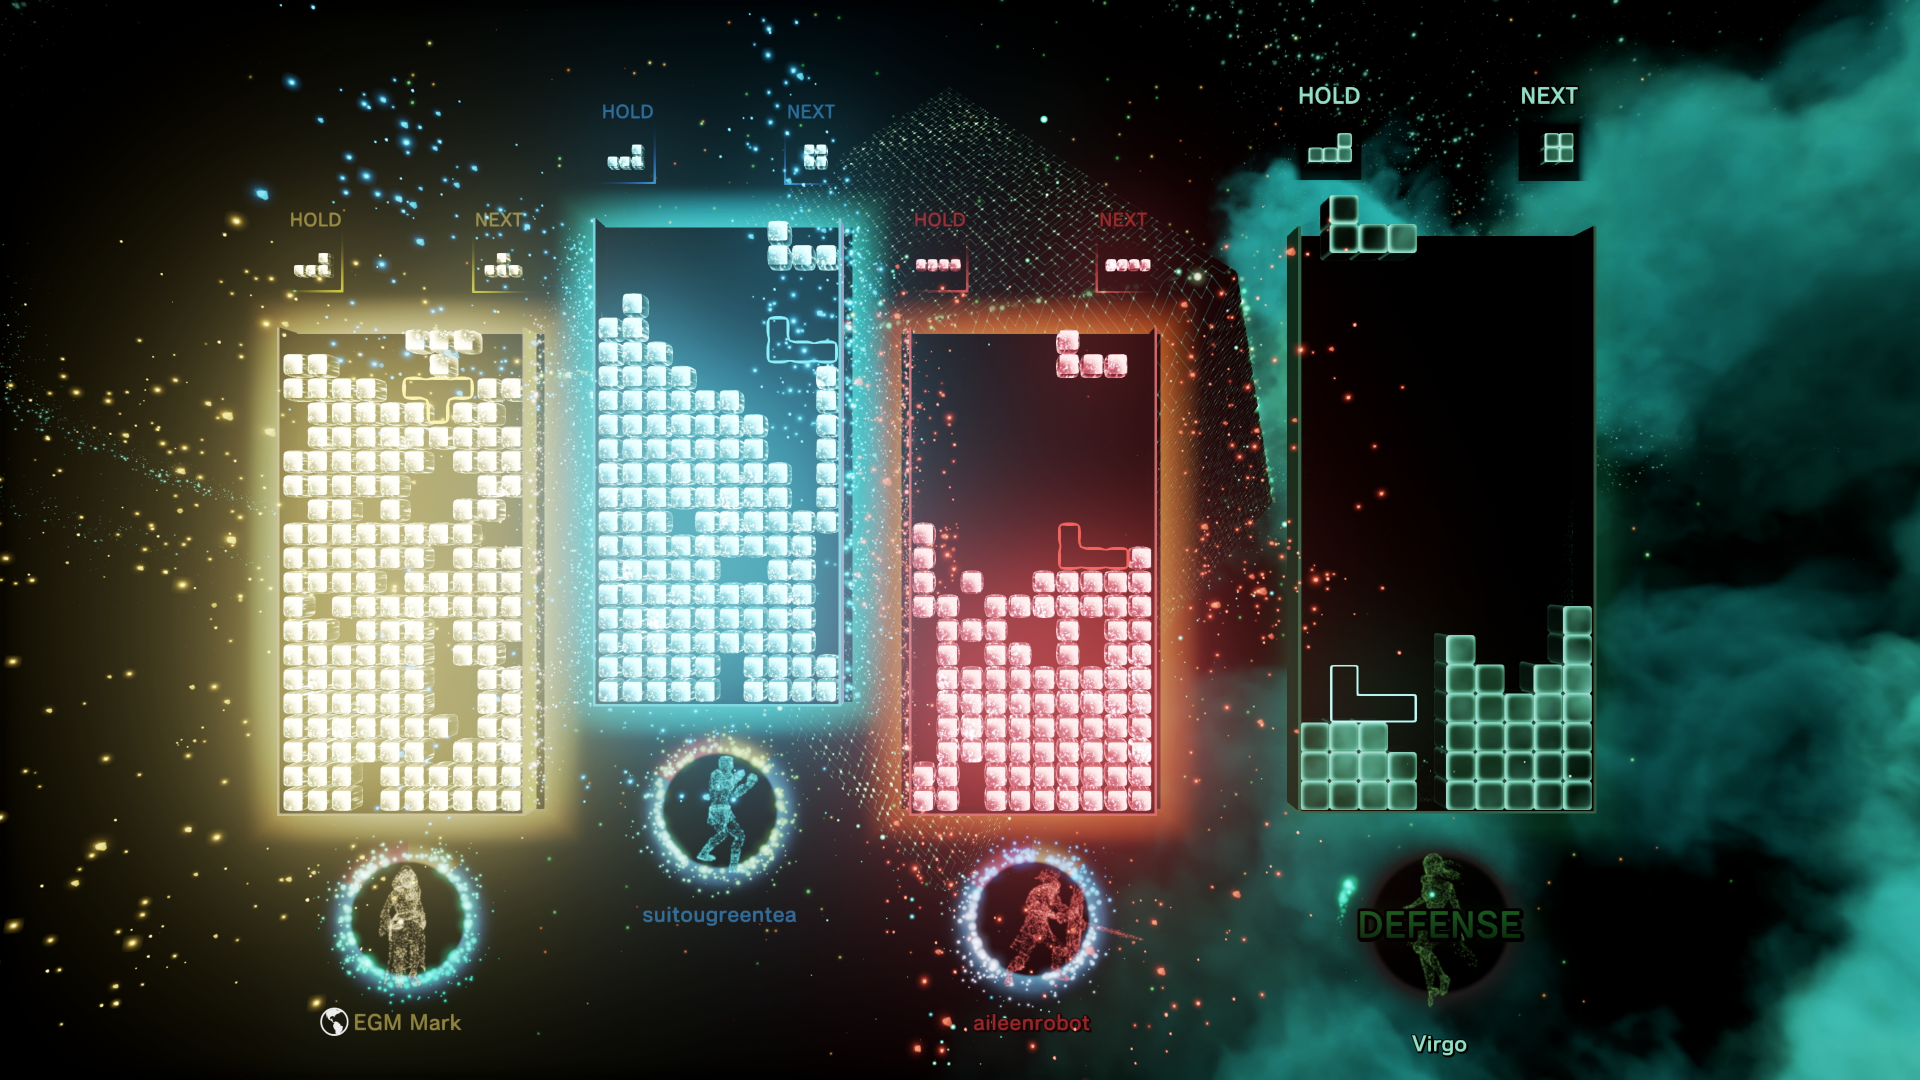 tetris effect connected ps4